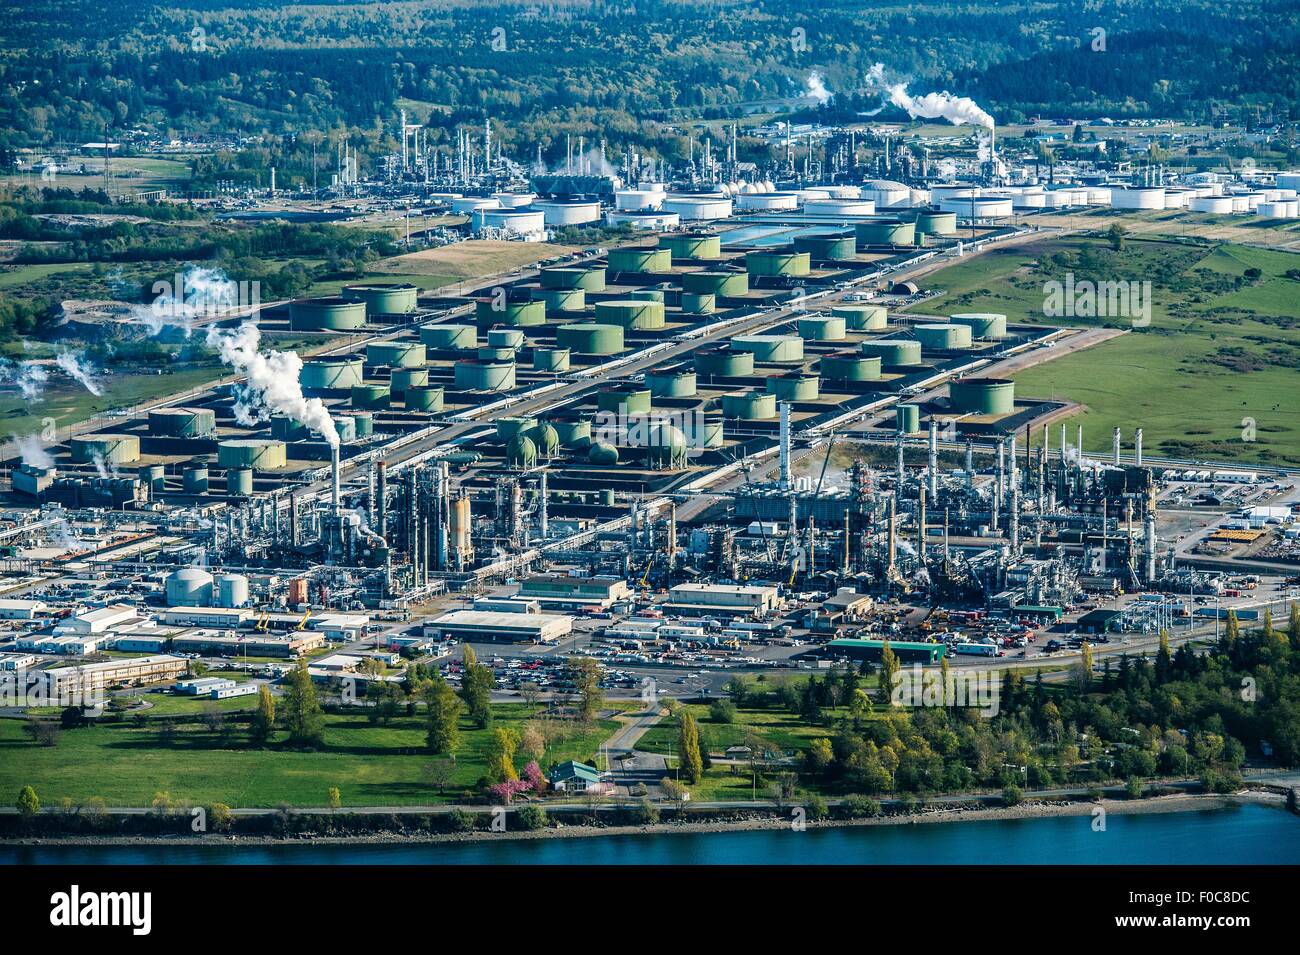 High angle view of green oil storage tanks in oil refinery Stock Photo